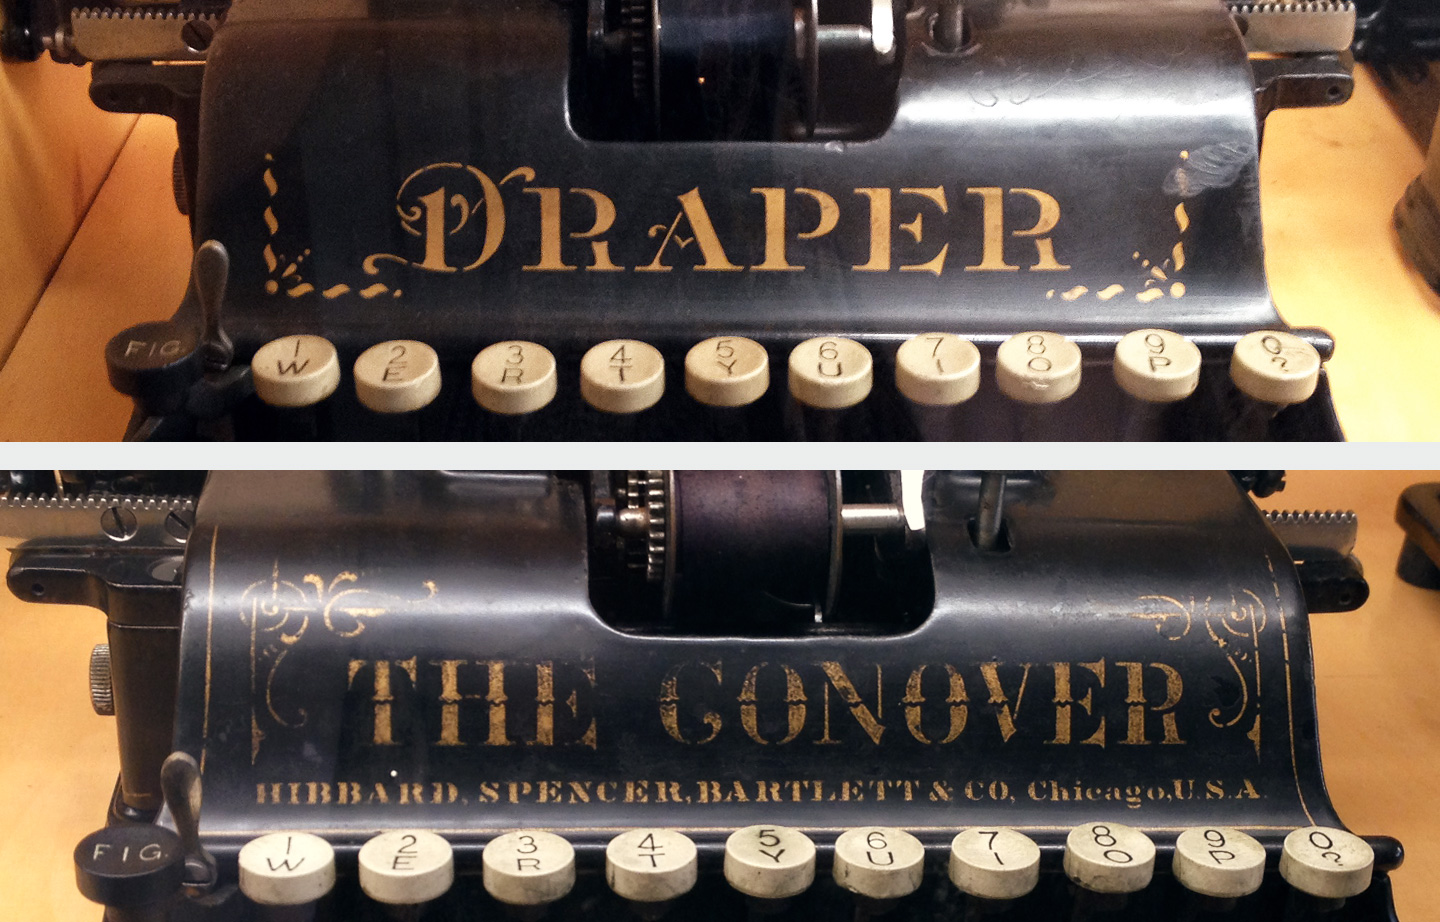 Samples of lettering work in two different typewriters